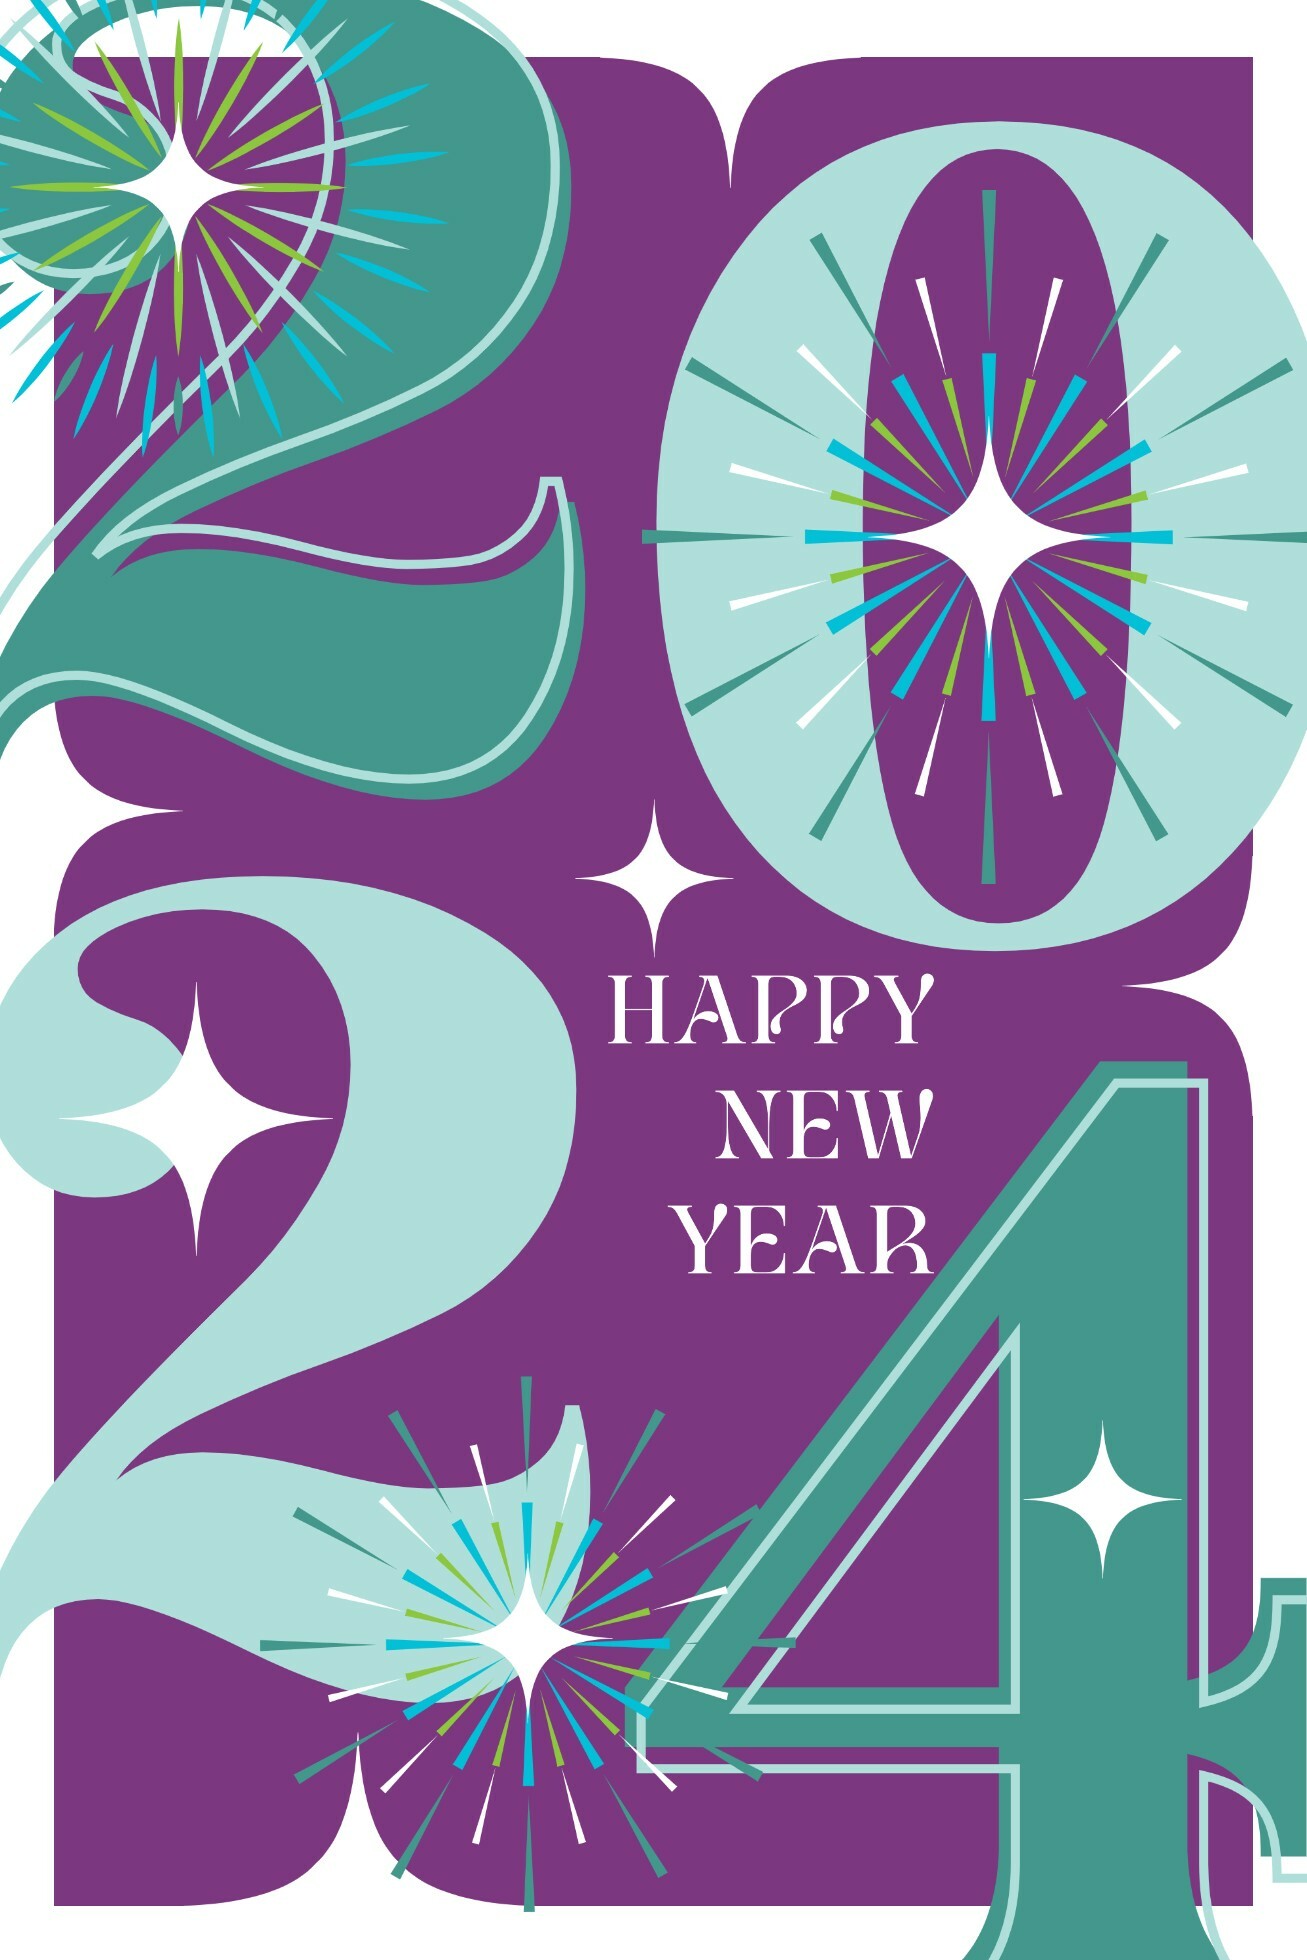 New Year Greeting Graphic for Social Media